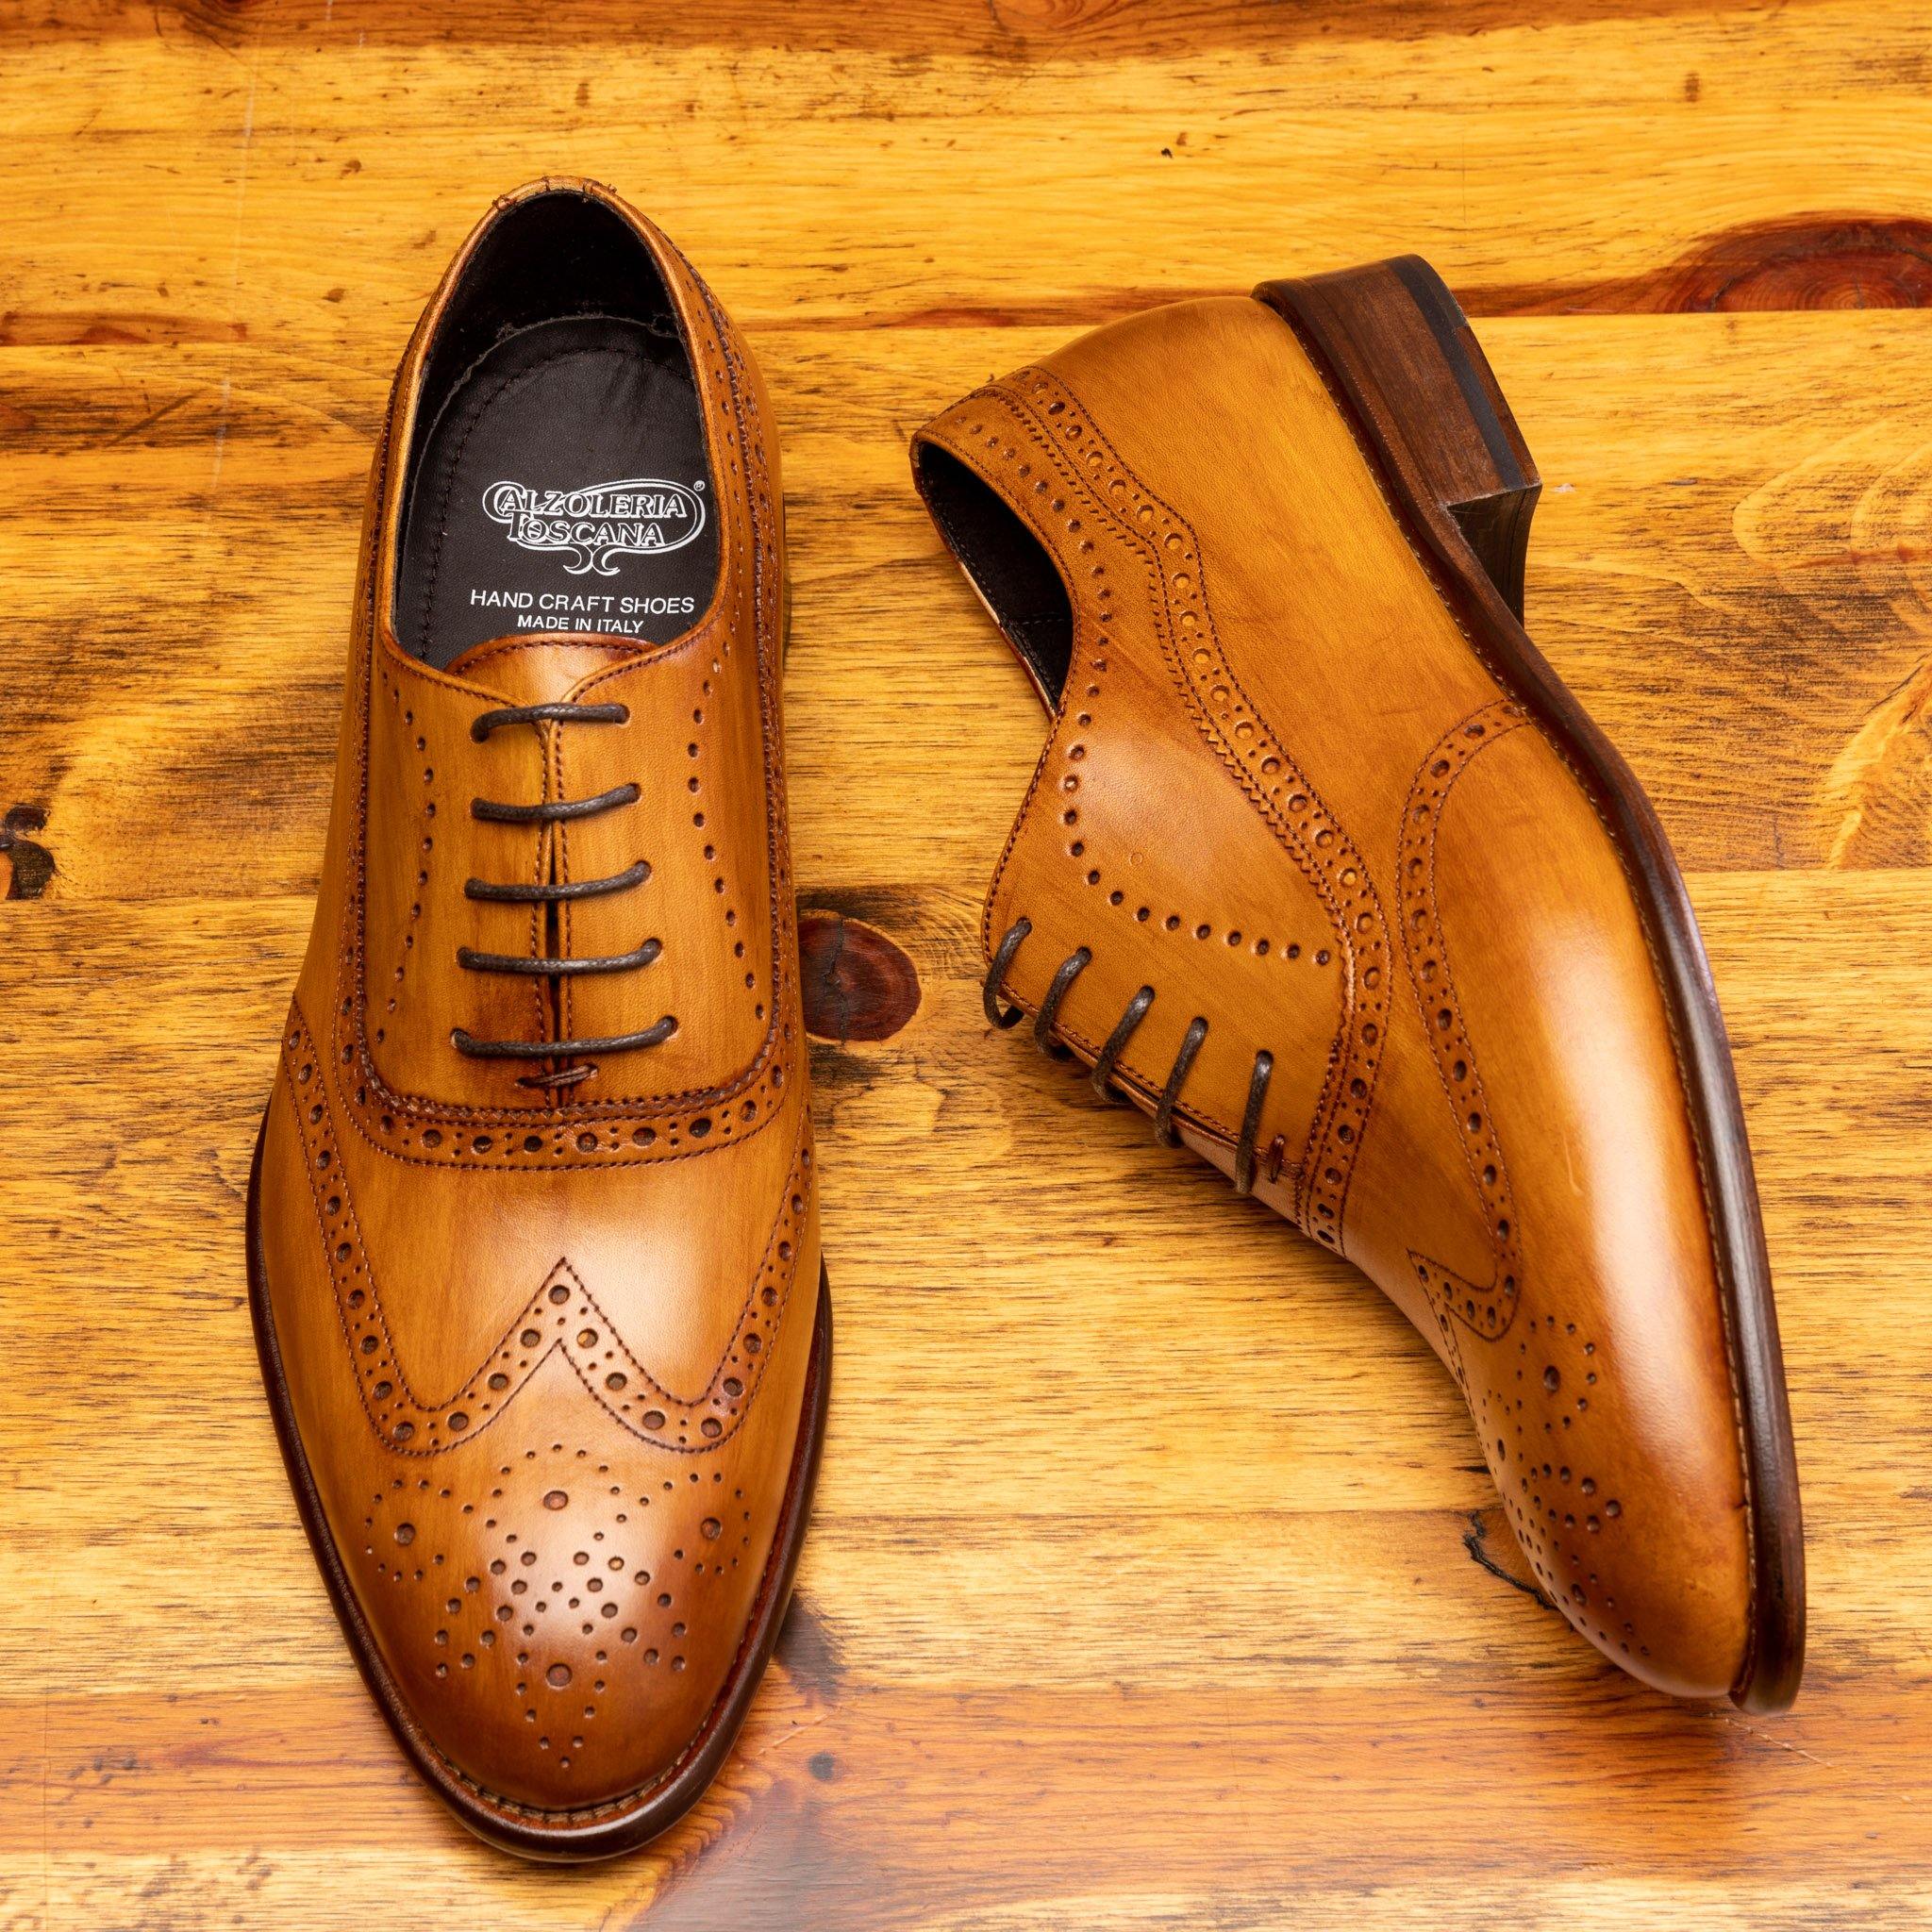 Pair of H742 Calzoleria Toscana Dark Caramel Balmoral Lace-up showing the brand name label on top of a wooden table